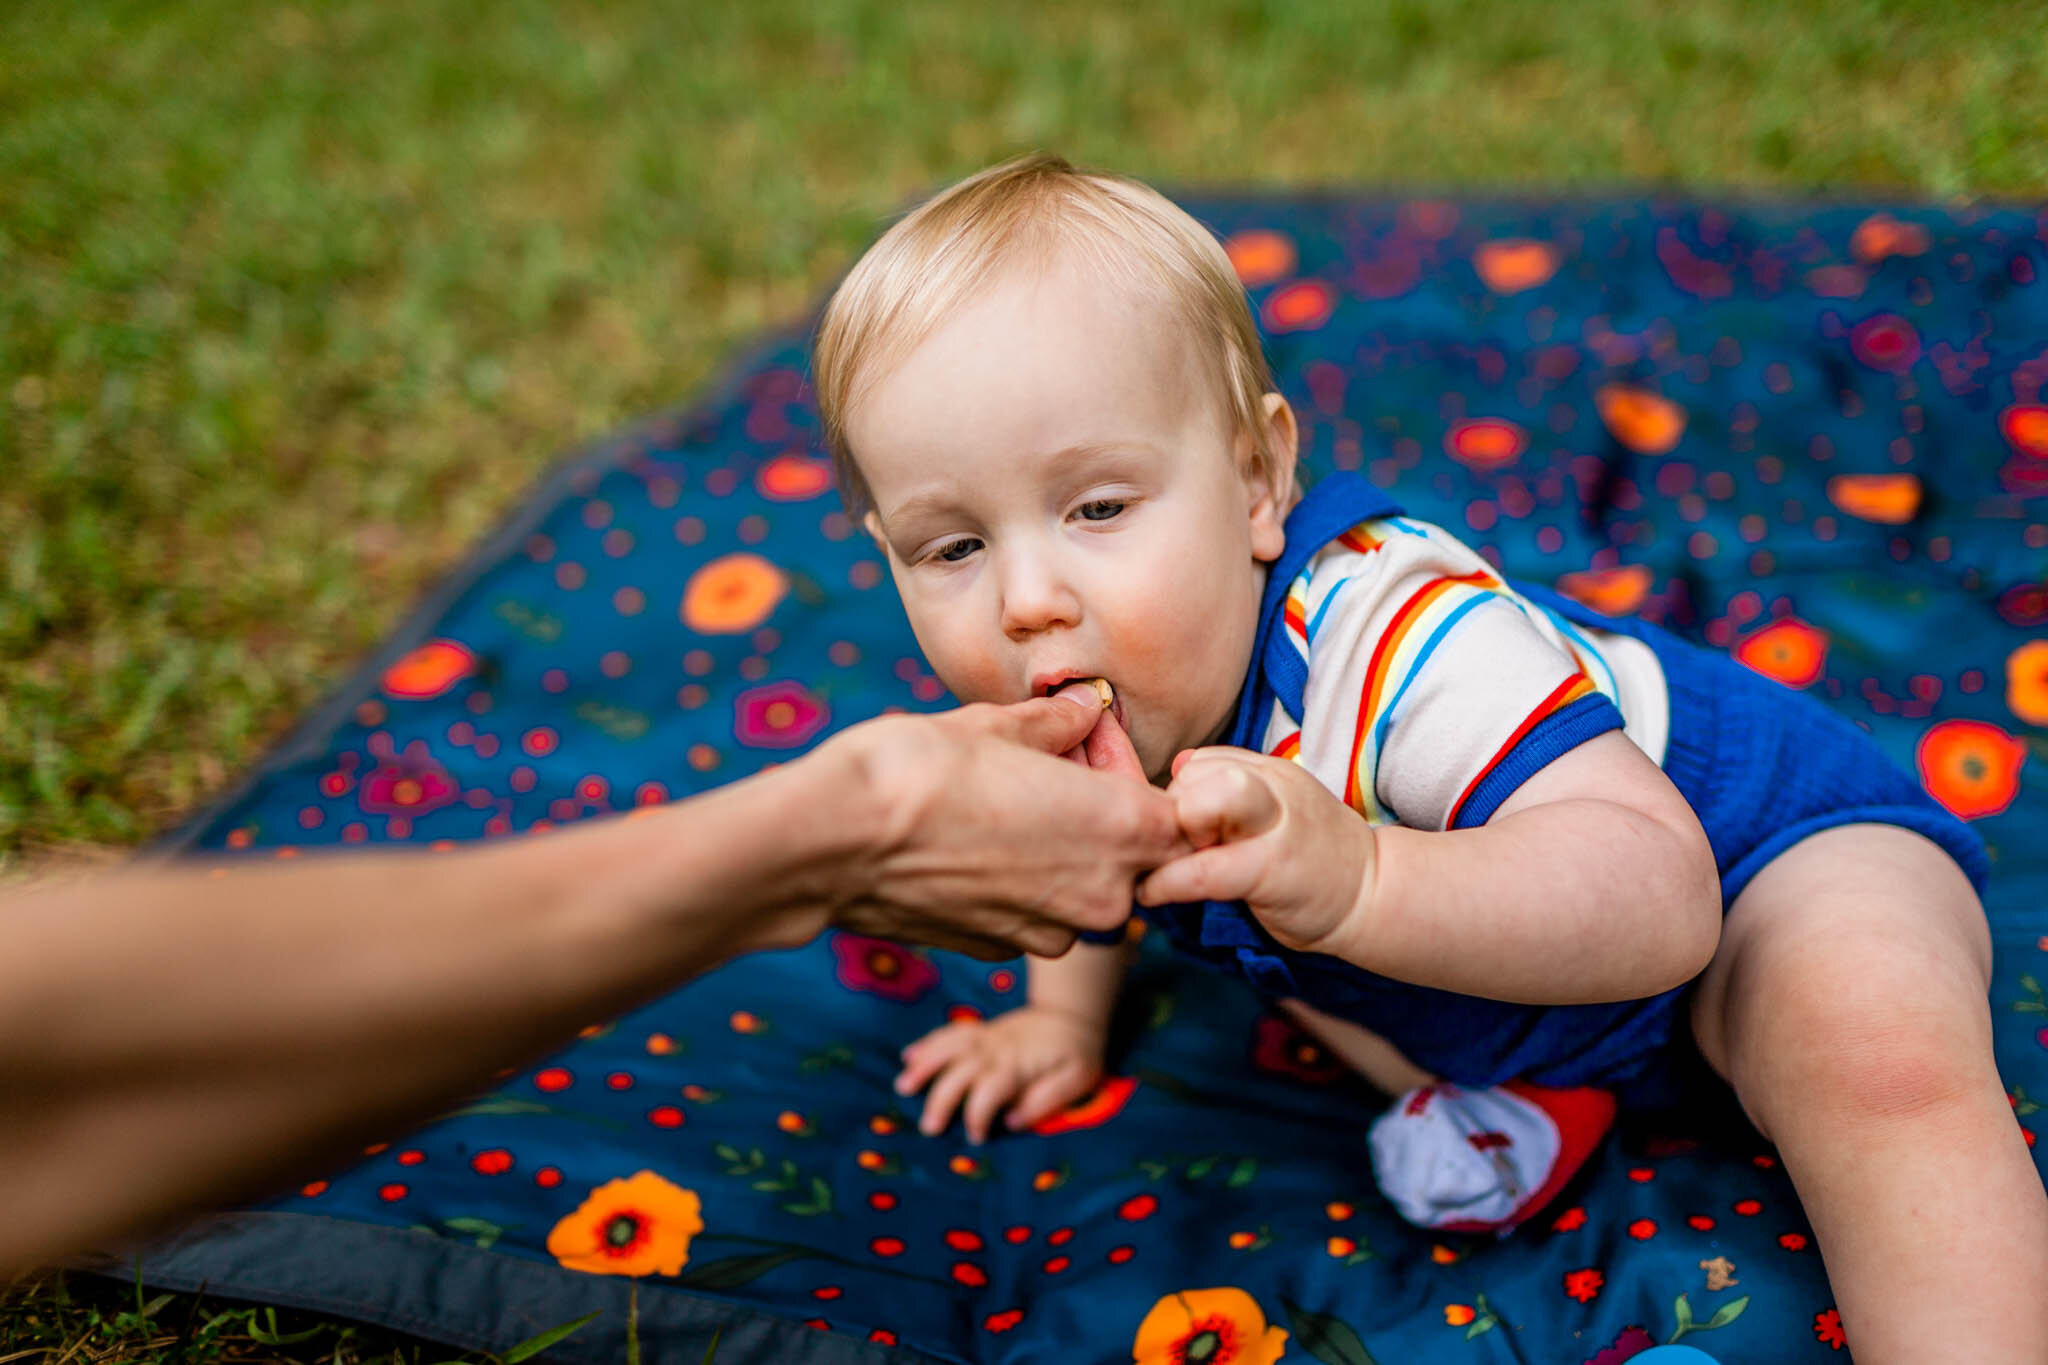 Raleigh Family Photographer | Umstead Park | By G. Lin Photography | Baby boy eating Cheerio from mom